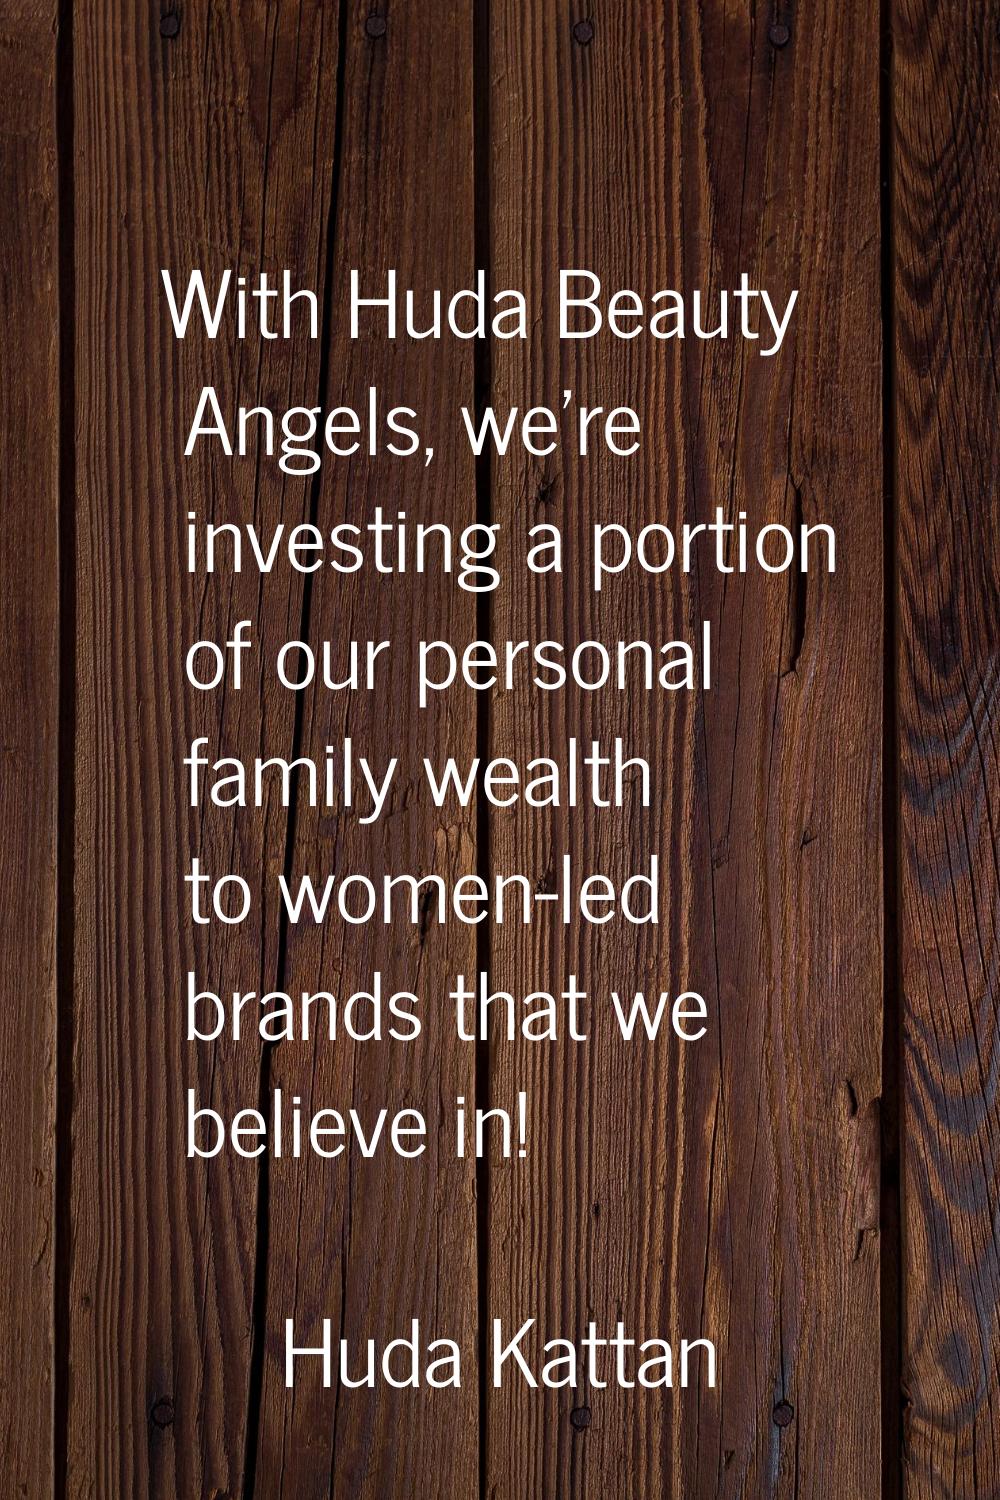 With Huda Beauty Angels, we're investing a portion of our personal family wealth to women-led brand